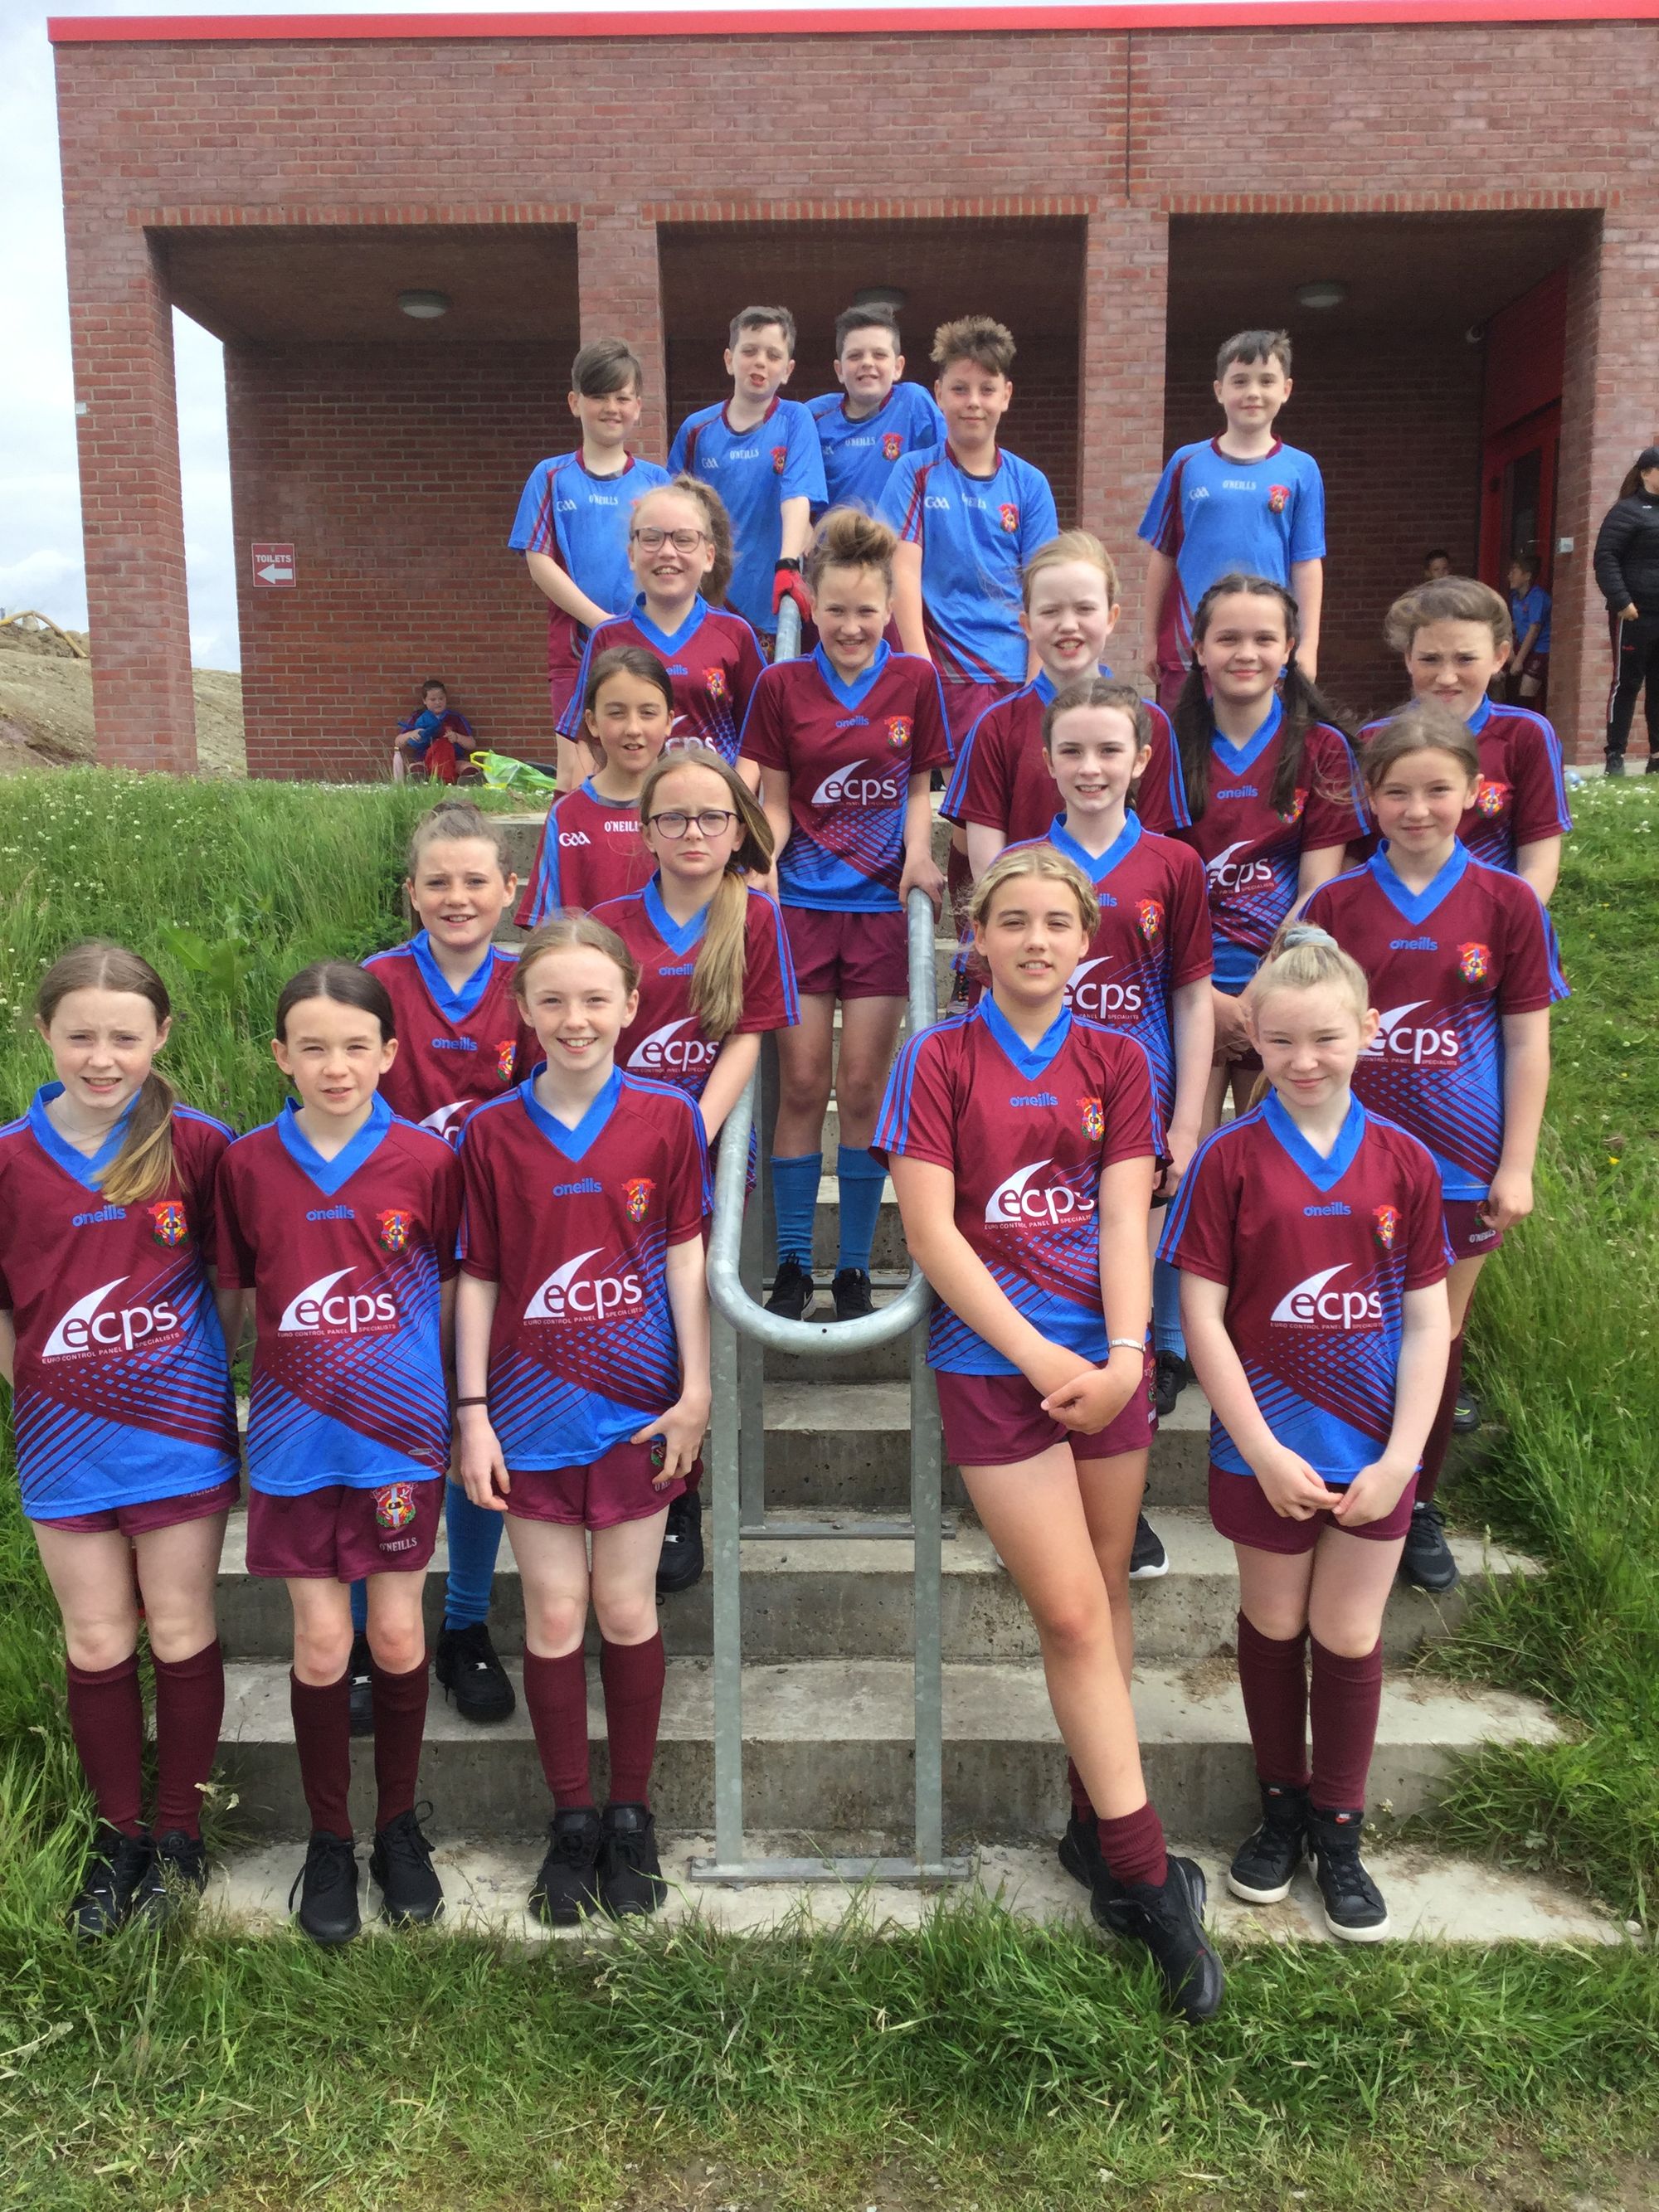 Today our Gaelic teams played their first matches of the year against Hollybush